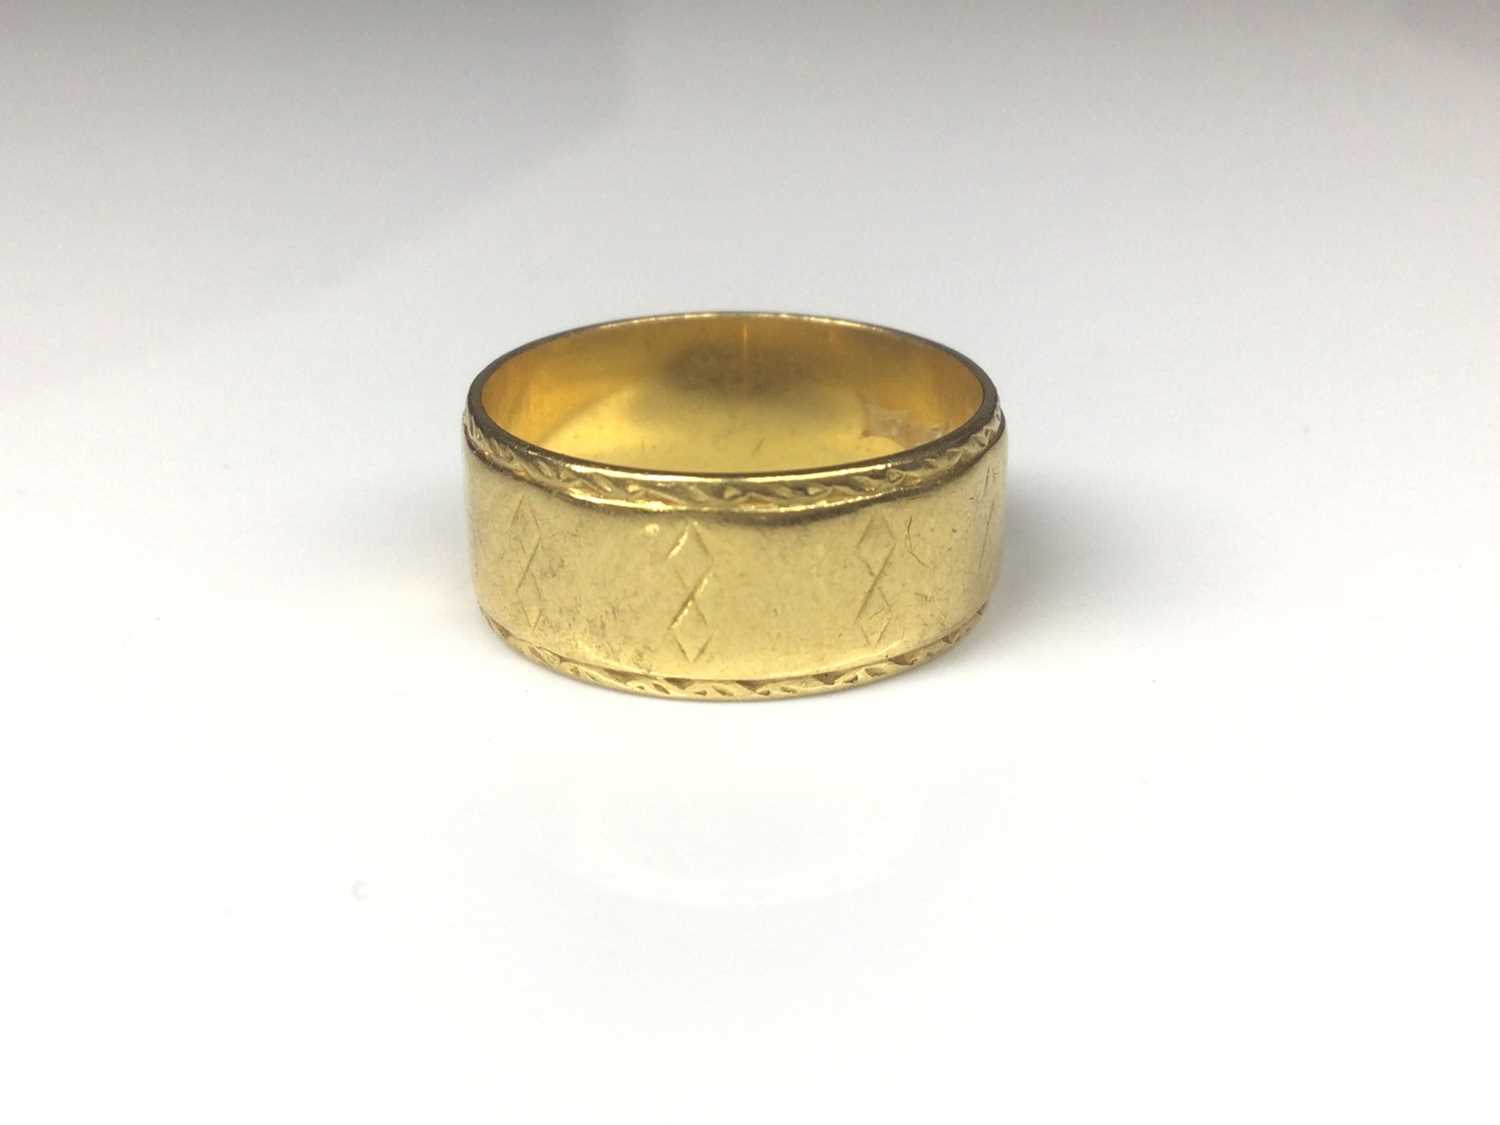 Lot 135 - 22ct gold wide band wedding ring with engraved geometric decoration